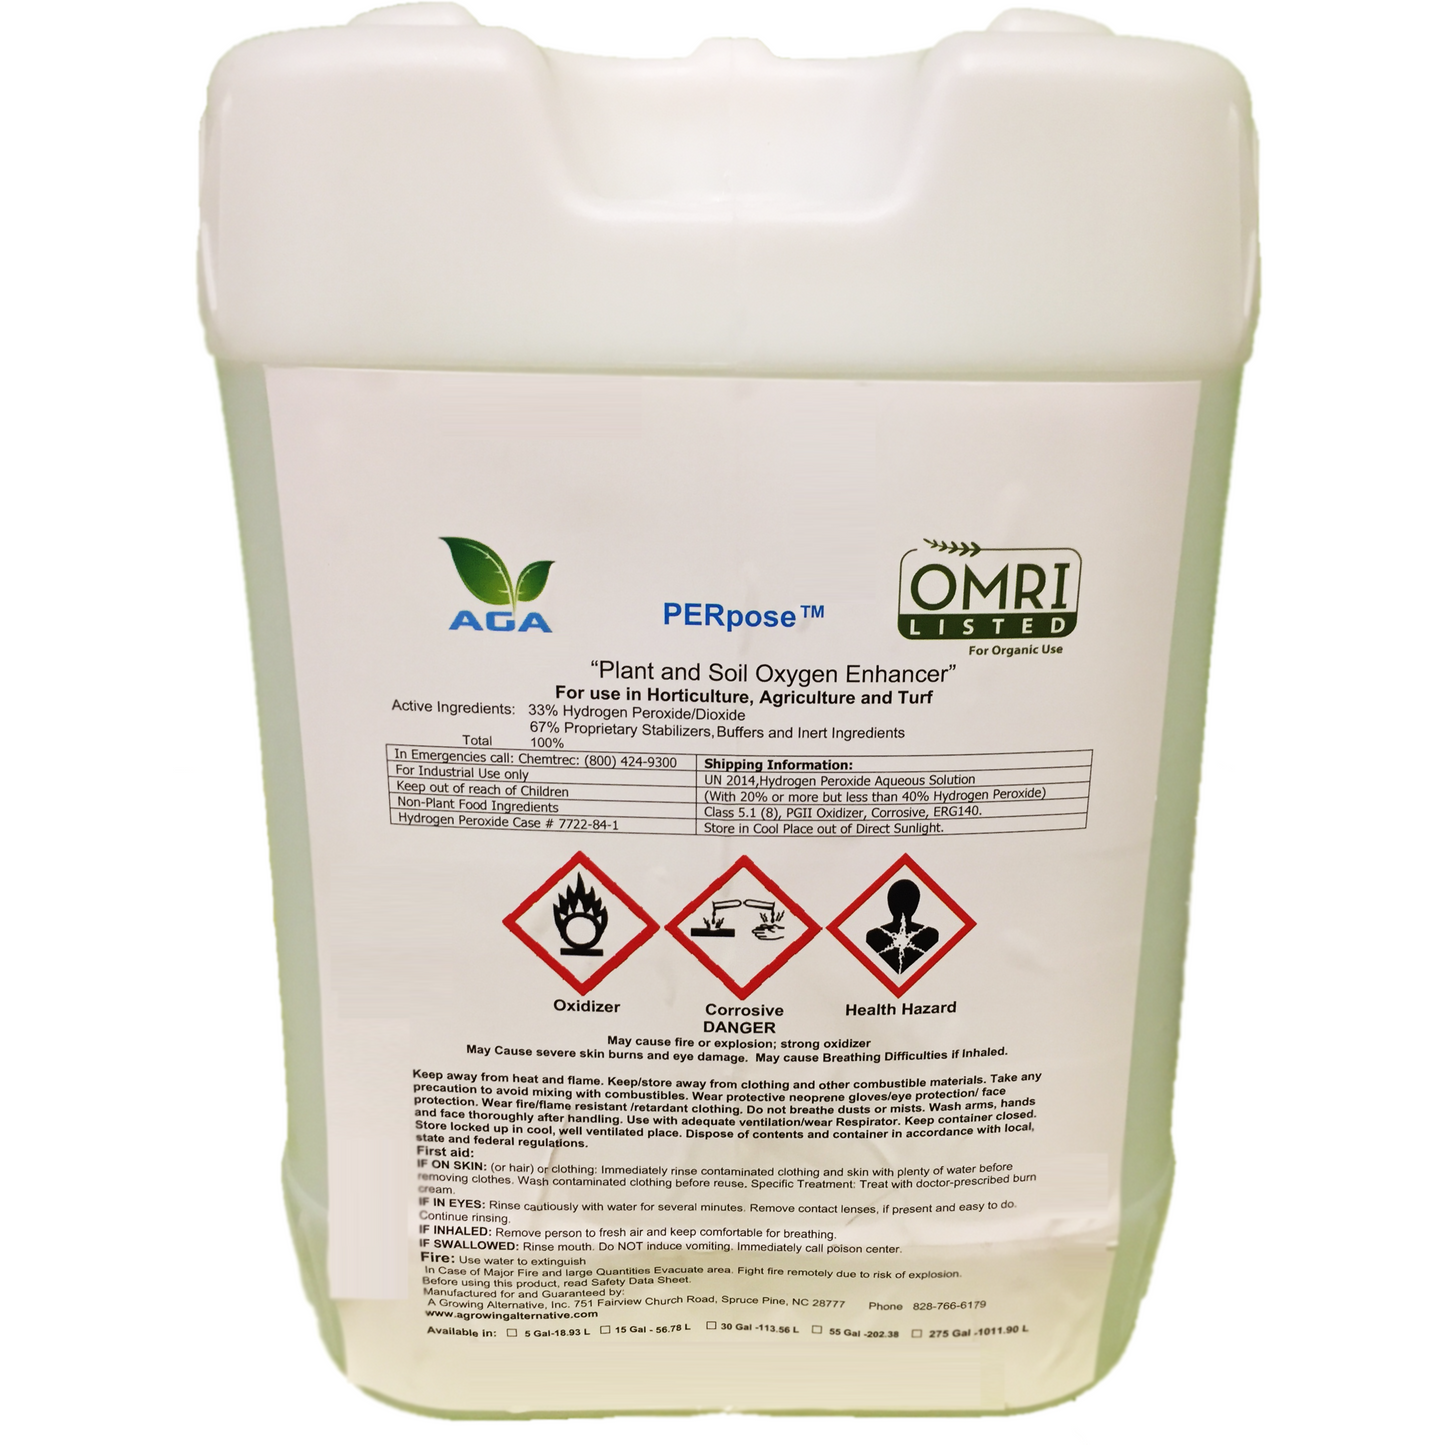 PERpose Soil & Plant Oxygen Enhancer Green Earth Ag and Turf